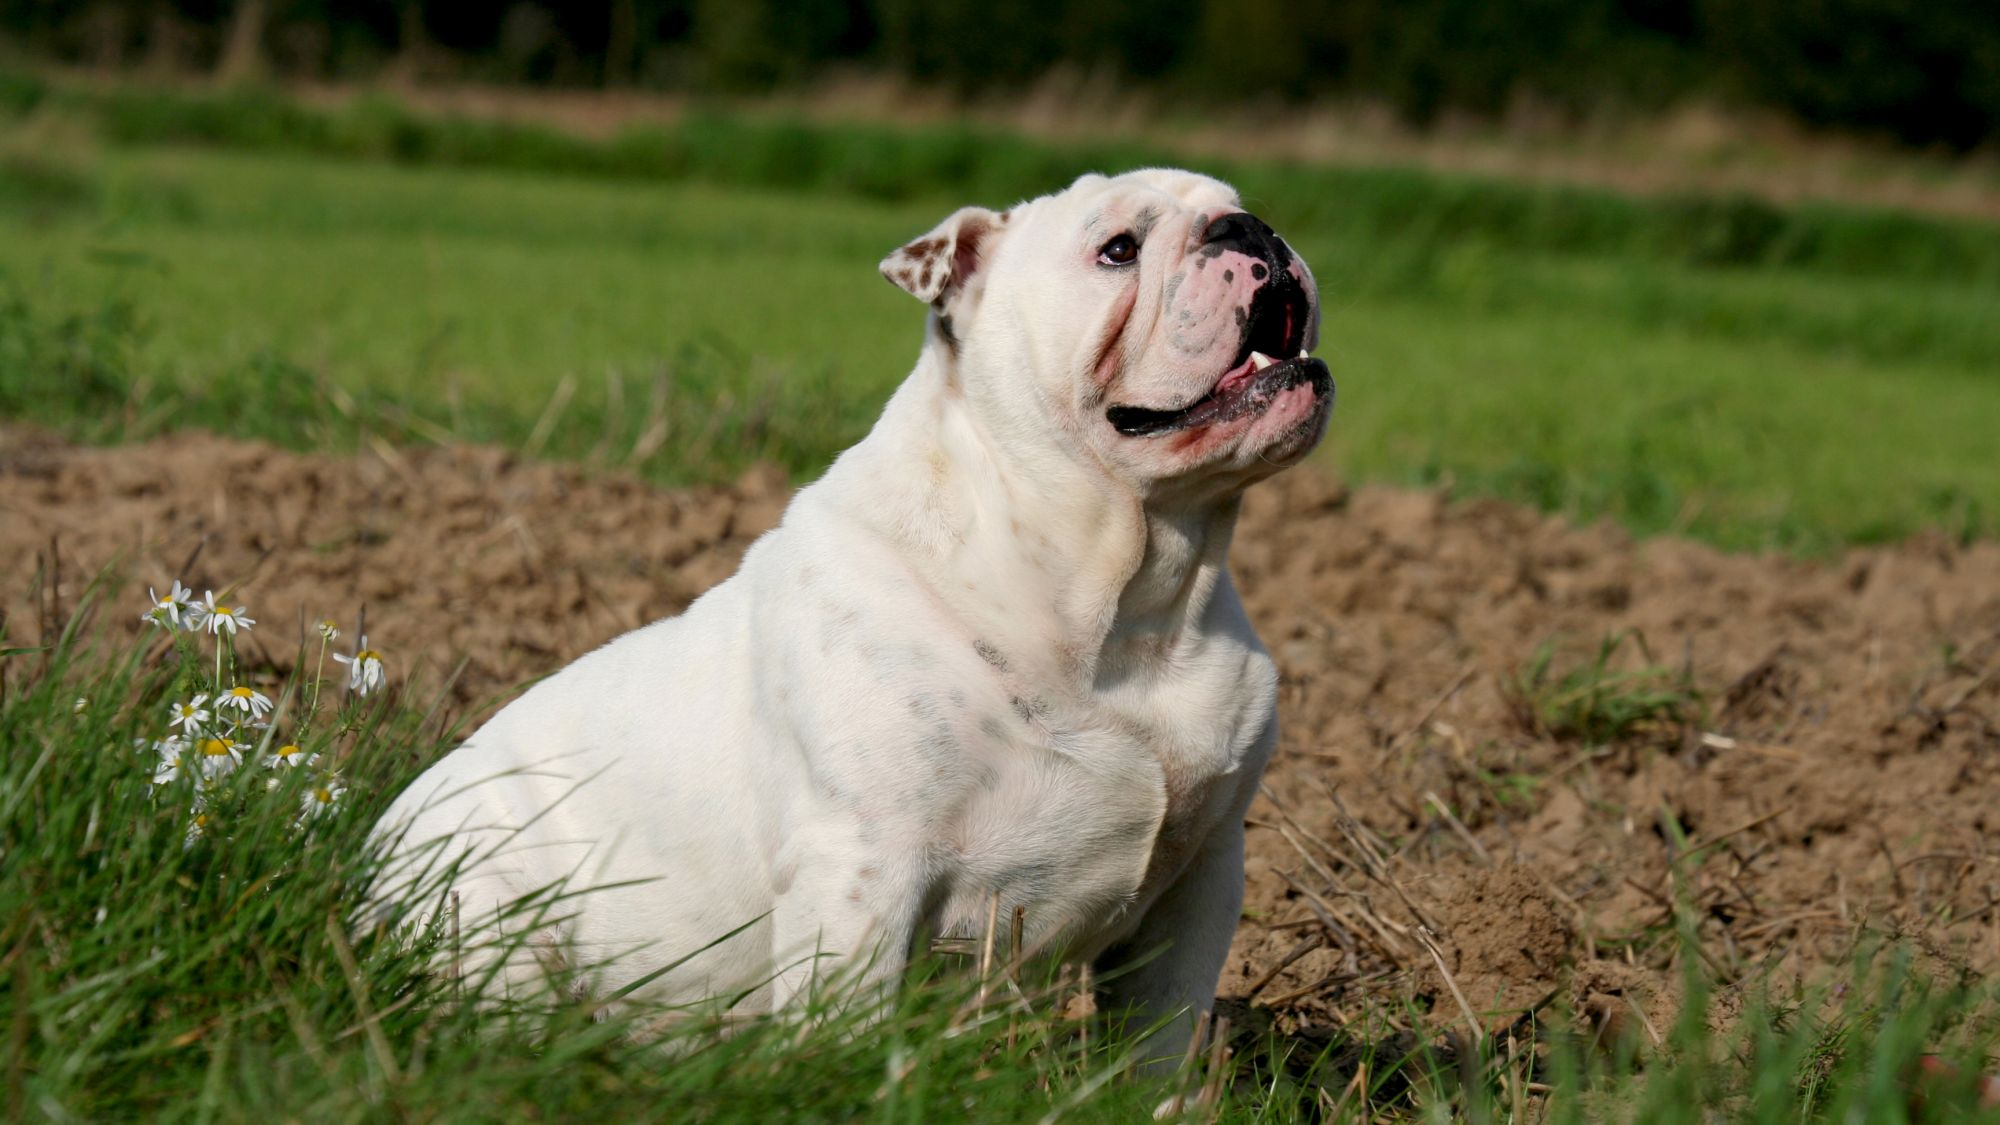 Bulldog sitting in grass looking up